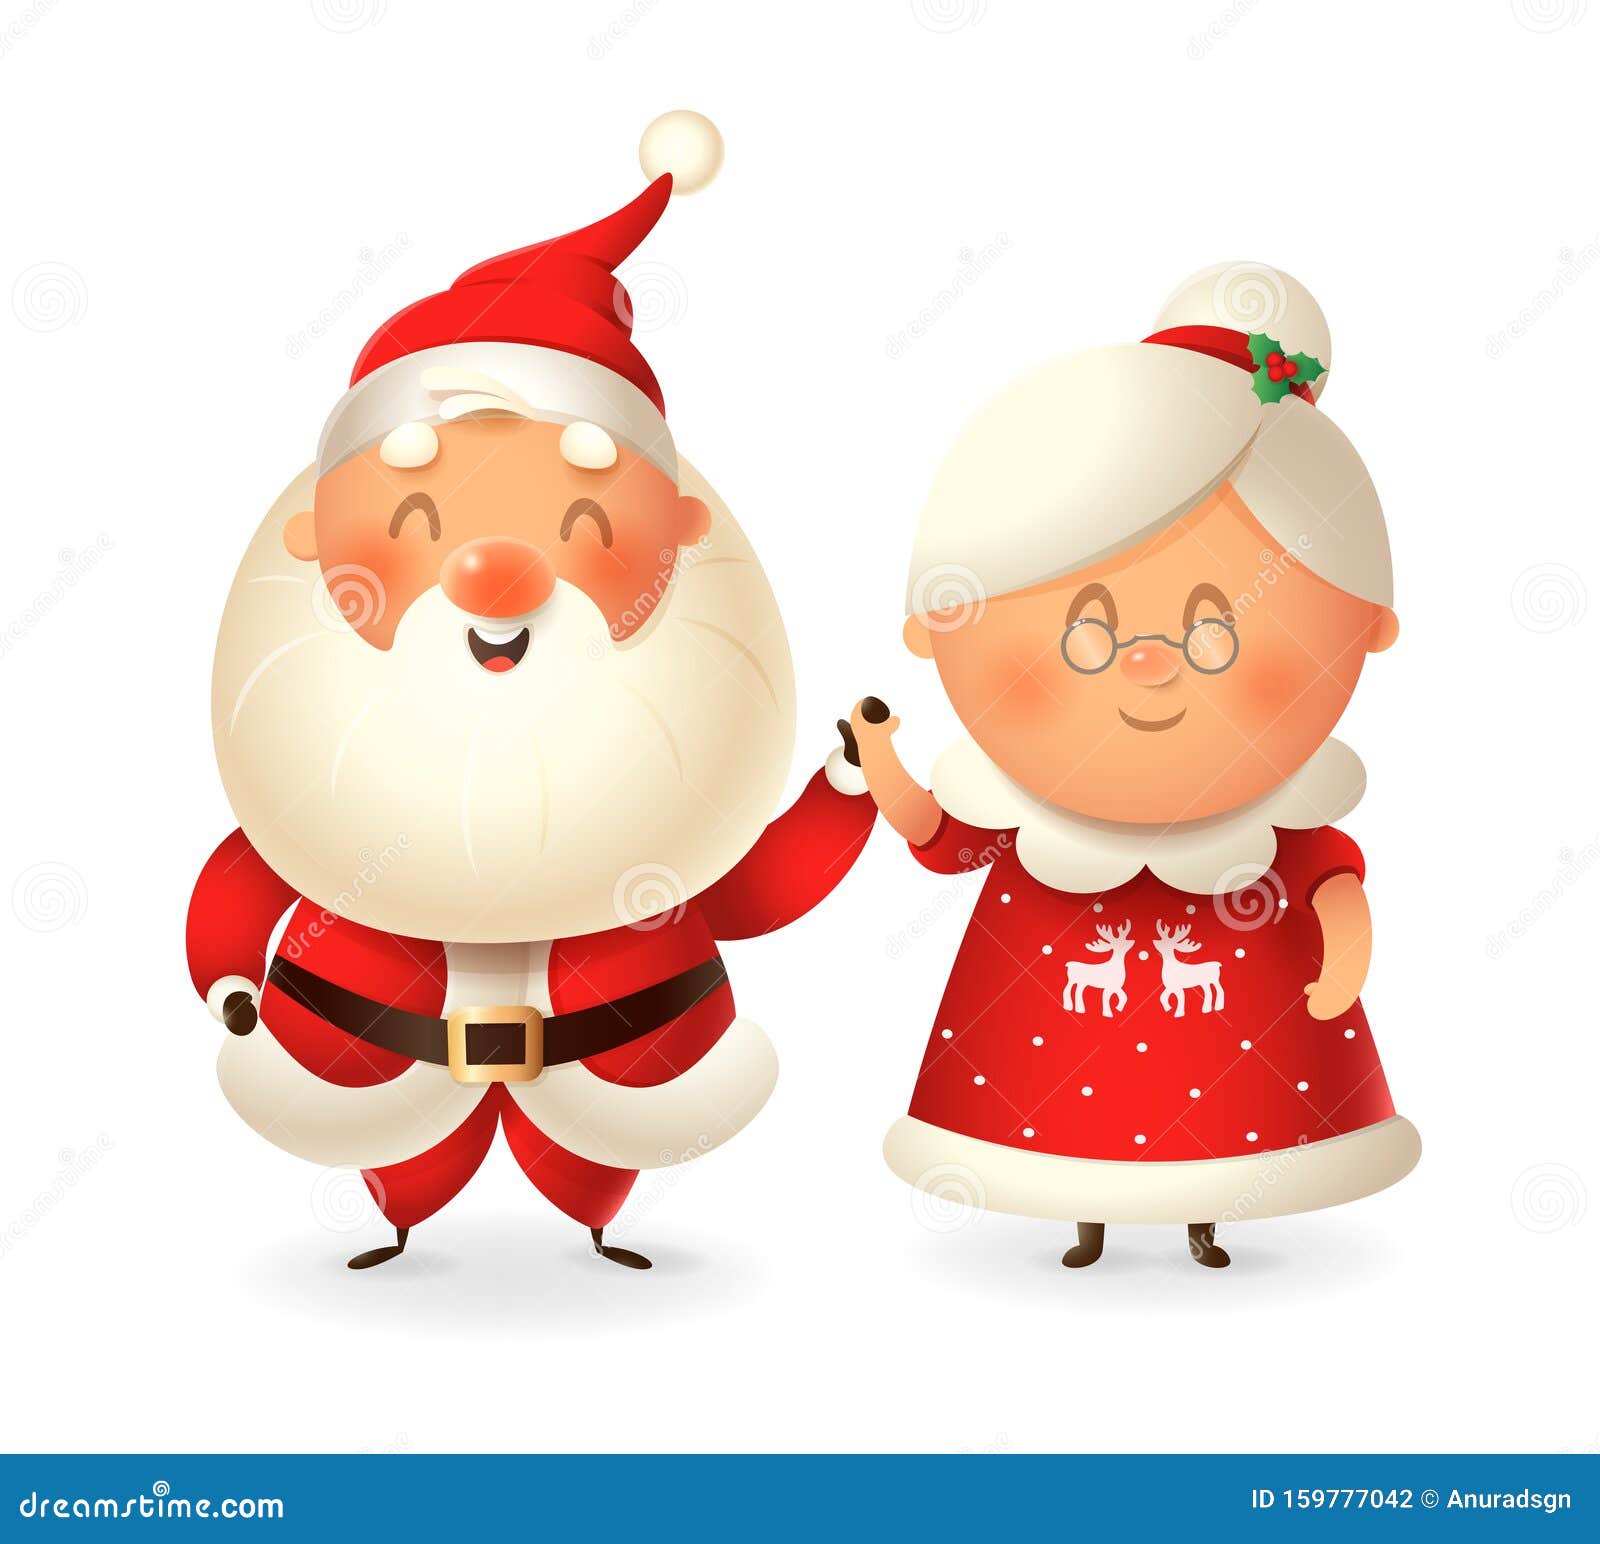 Santa Claus And His Wife Mrs Claus Celebrate Holidays Vector Illustration Isolated On